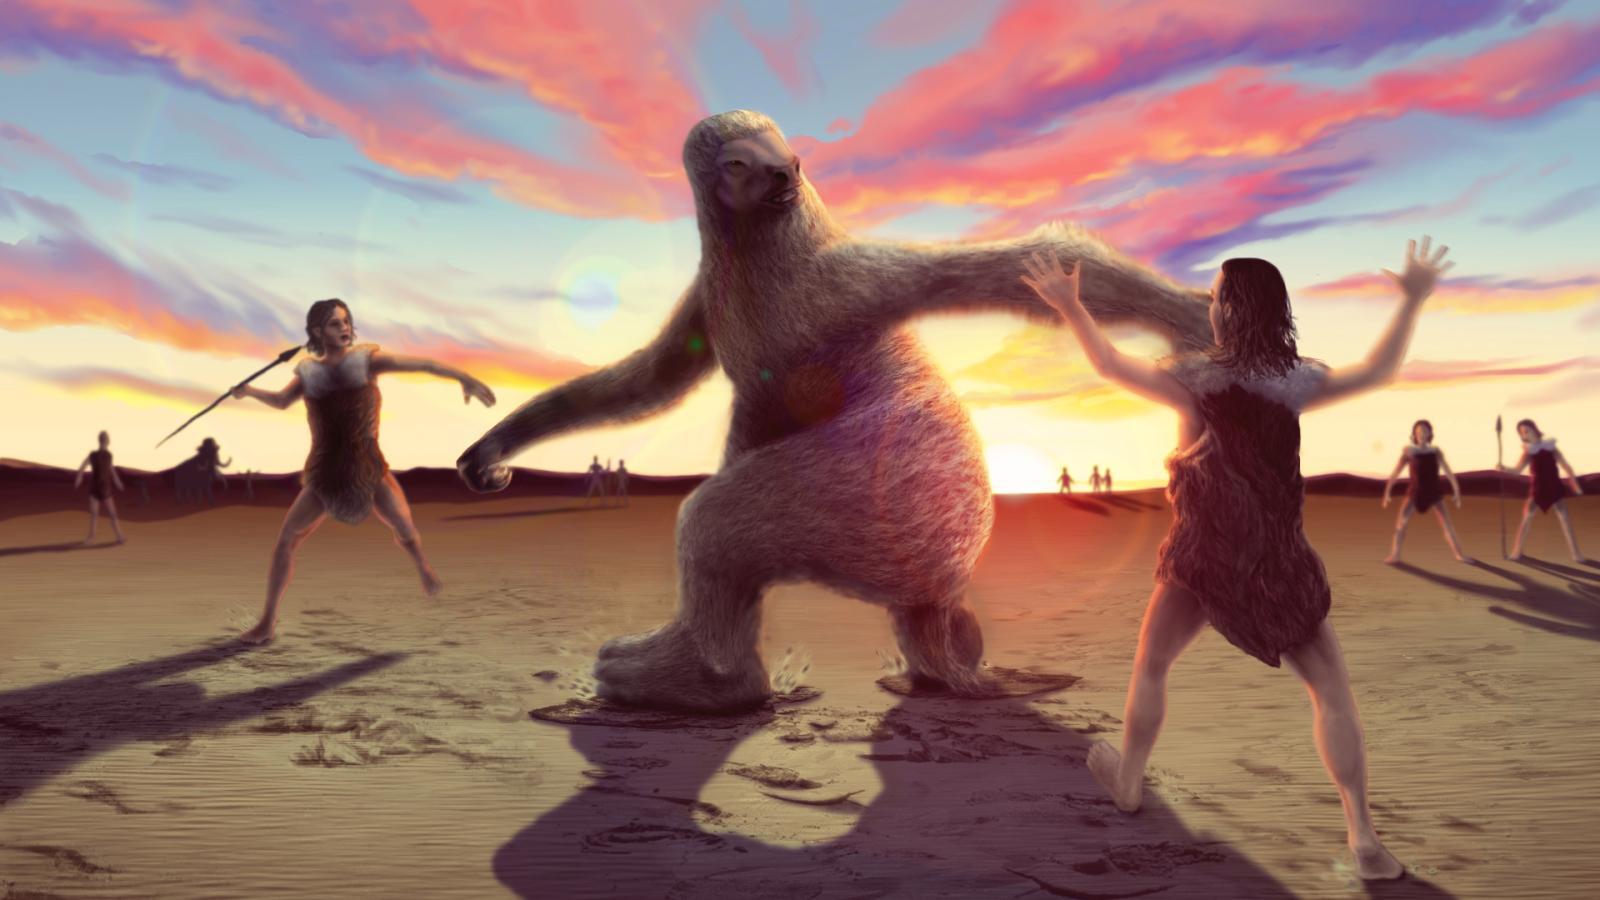 Early humans likely ate giant sloths, a new study shows